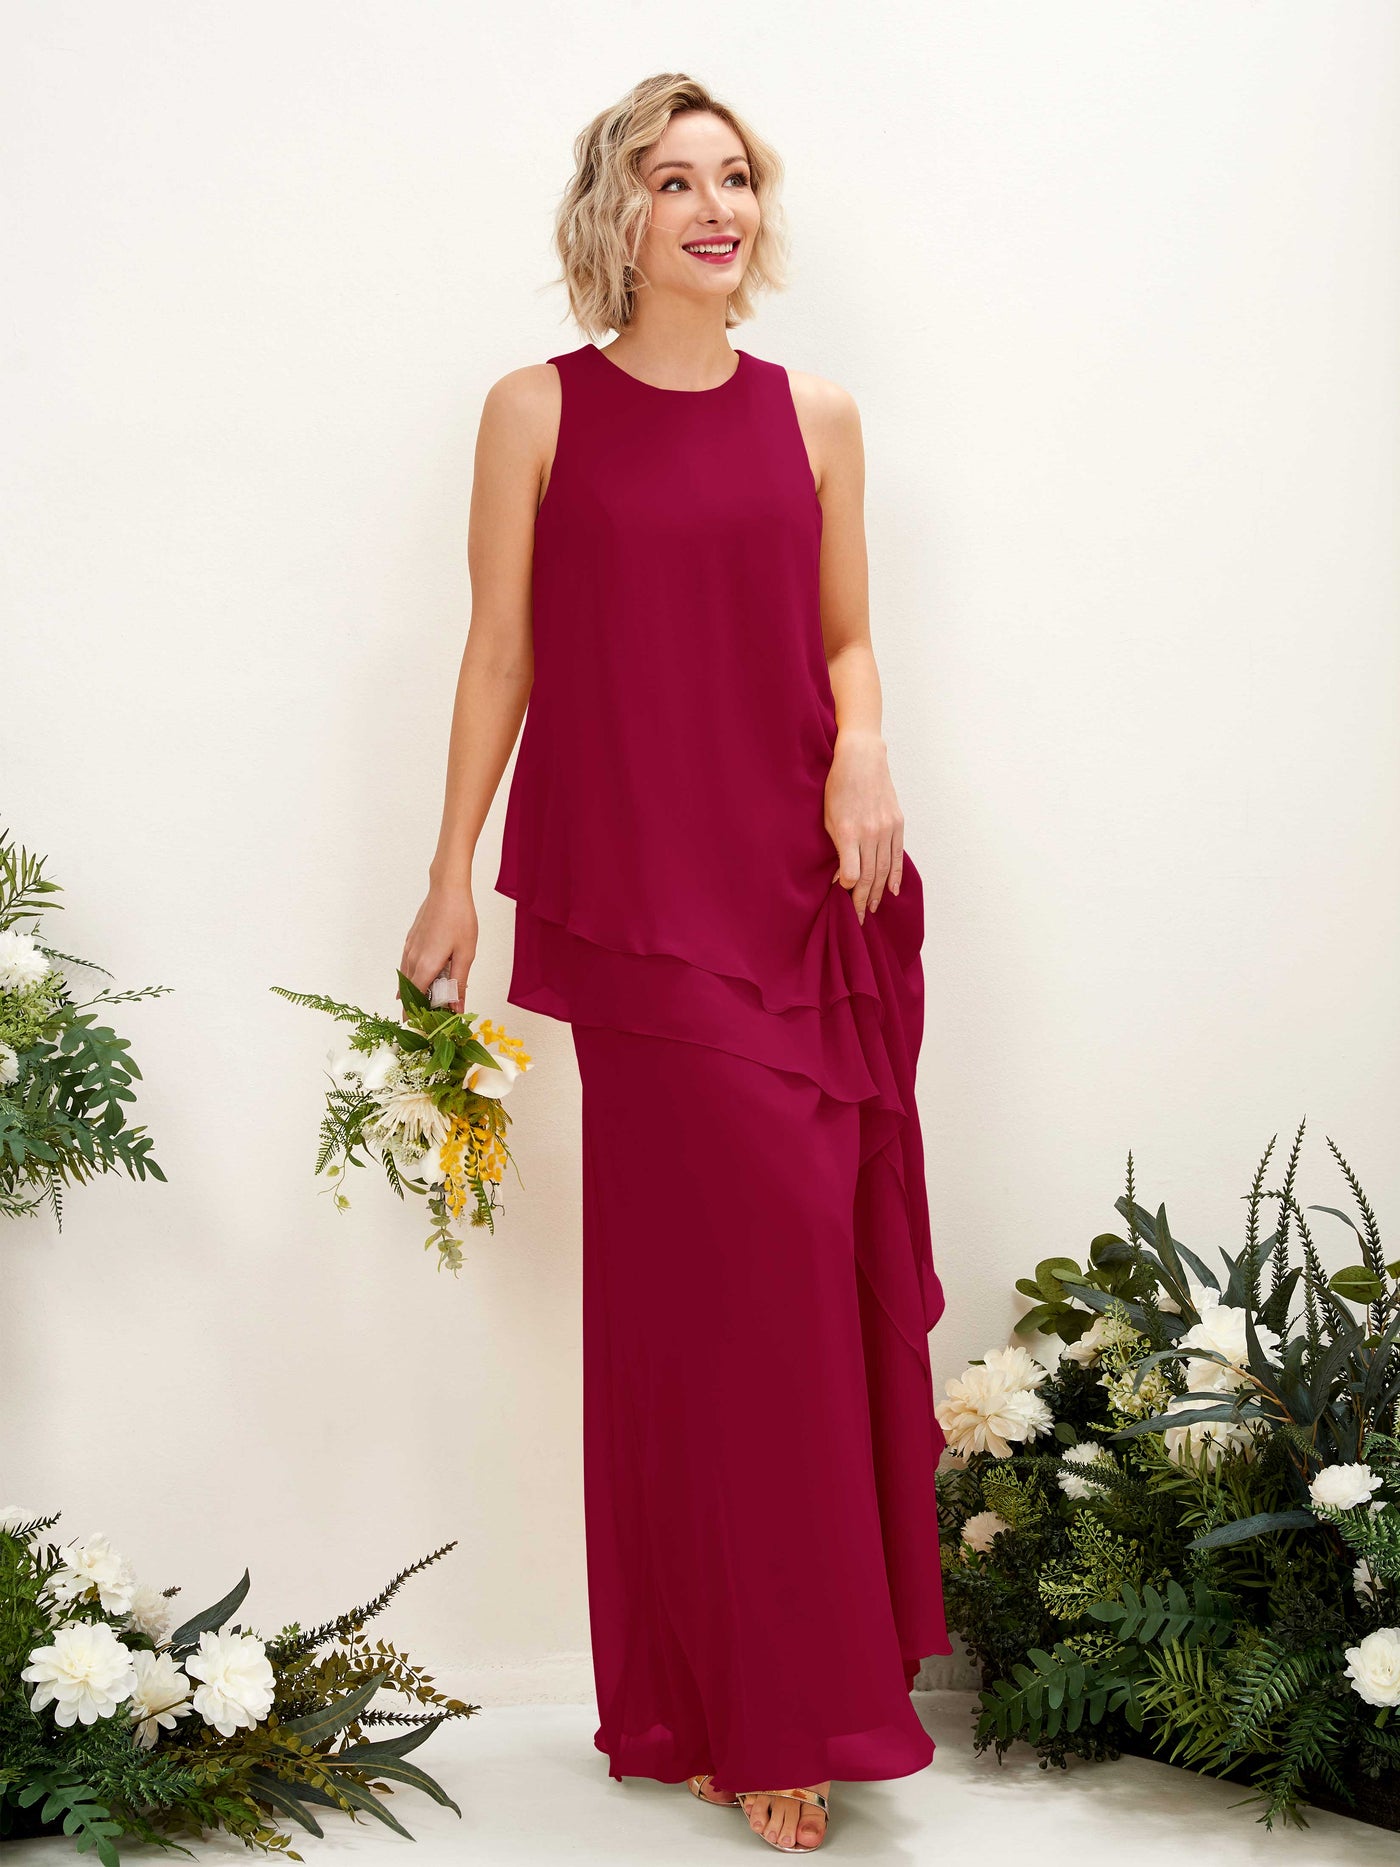 Jester Red Bridesmaid Dresses Bridesmaid Dress Maternity Chiffon Round Full Length Sleeveless Wedding Party Dress (81222341)#color_jester-red